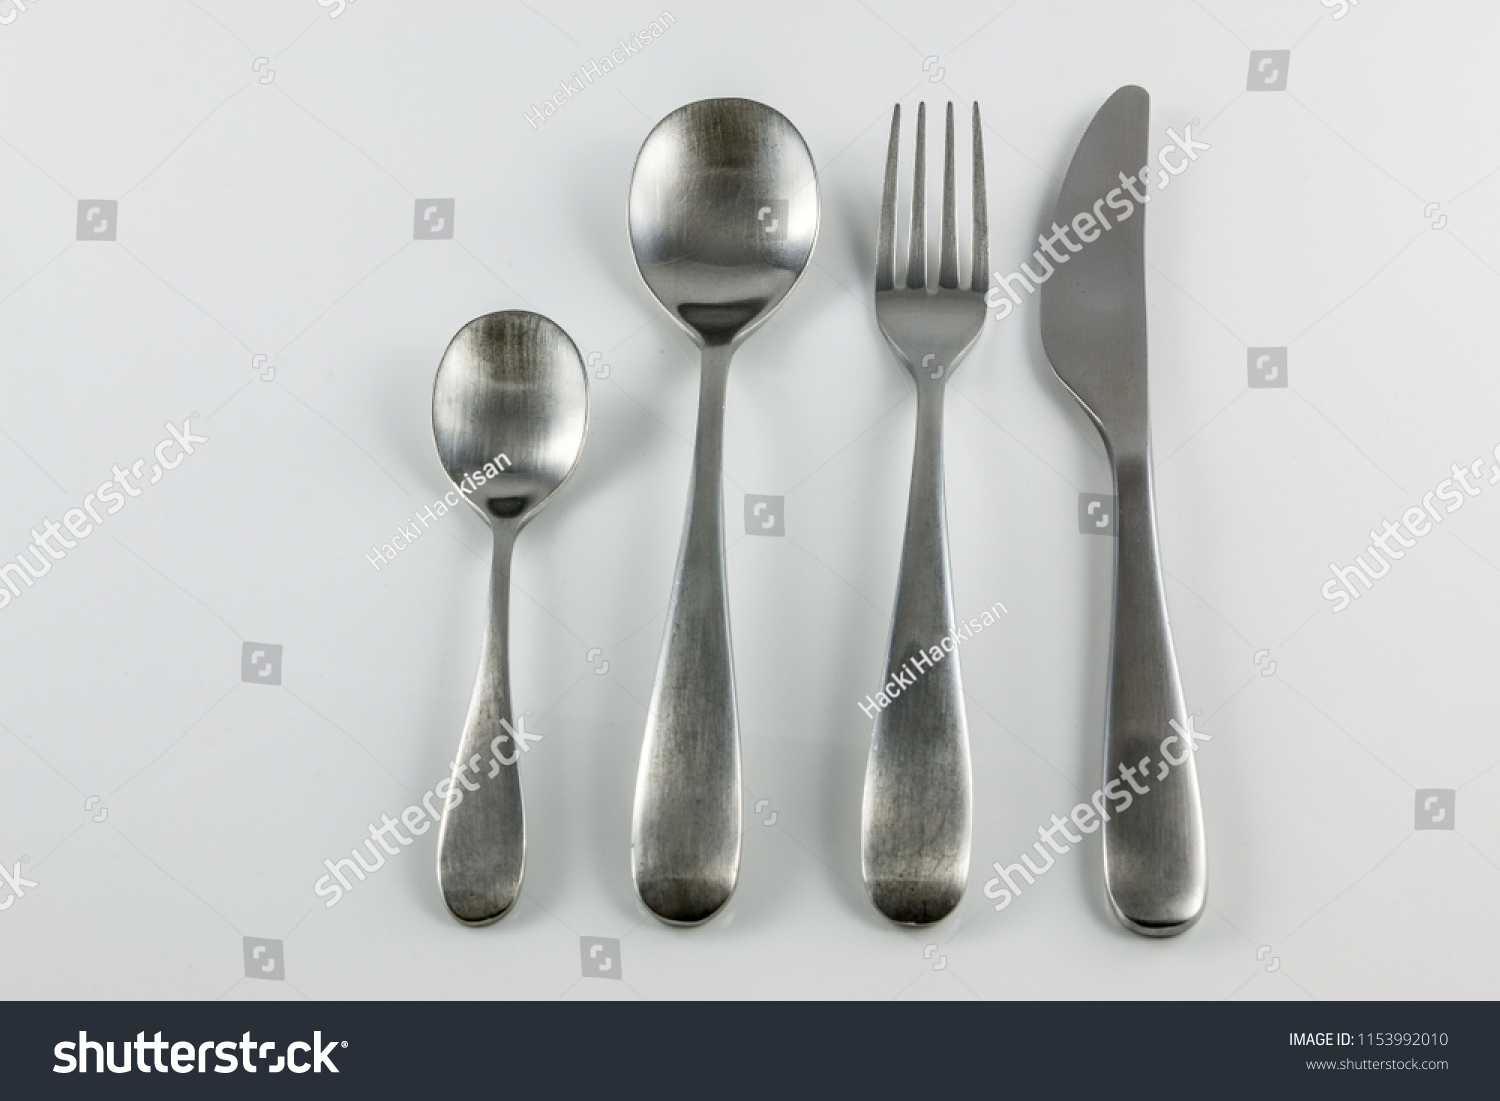 Cutlery with knife, fork, table spoon and little spoon #1153992010